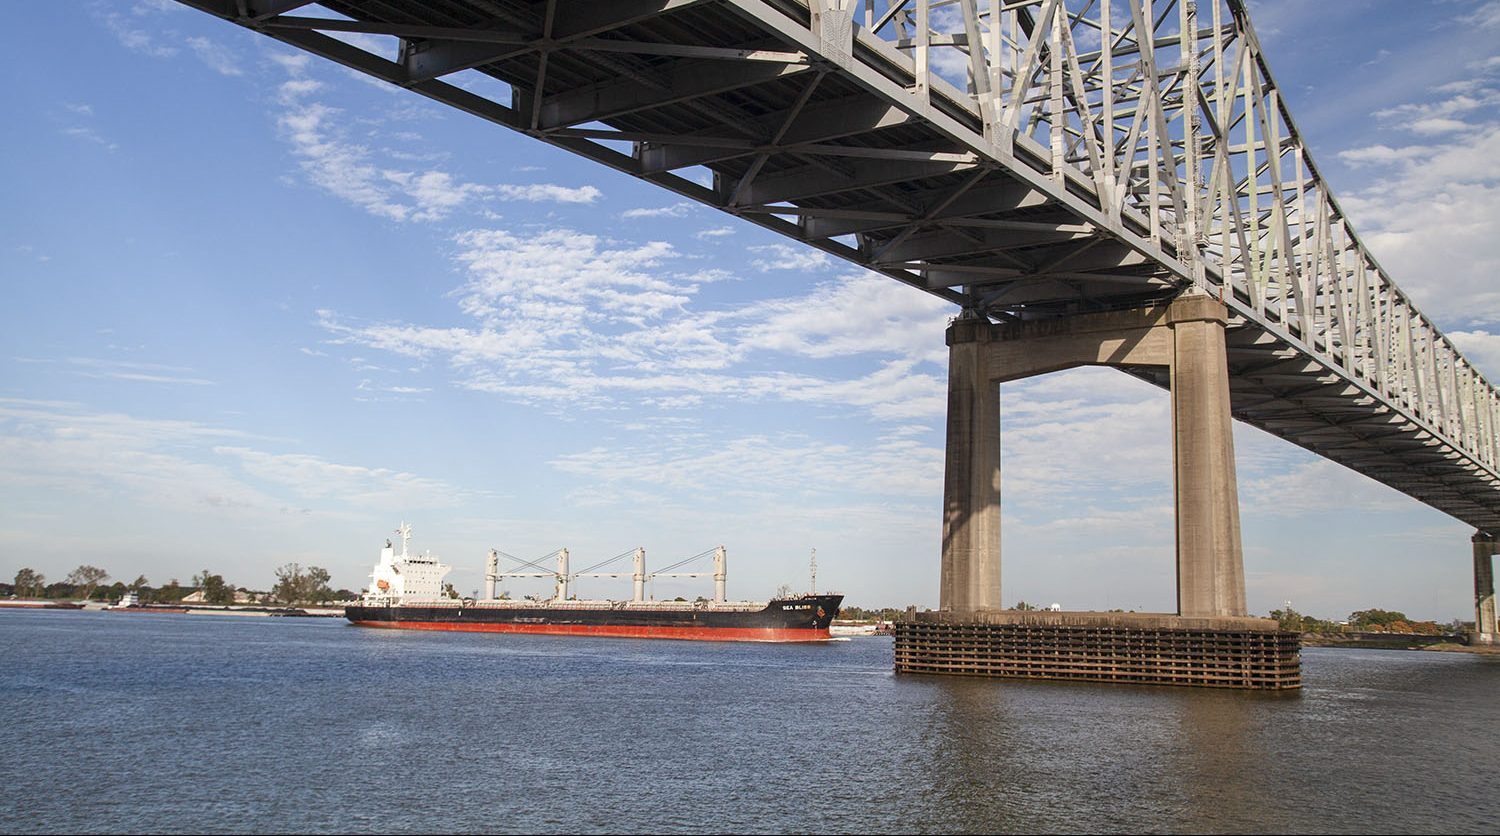 Mississippi River Ship Channel at New Orleans. (Photo by Frank McCormack)